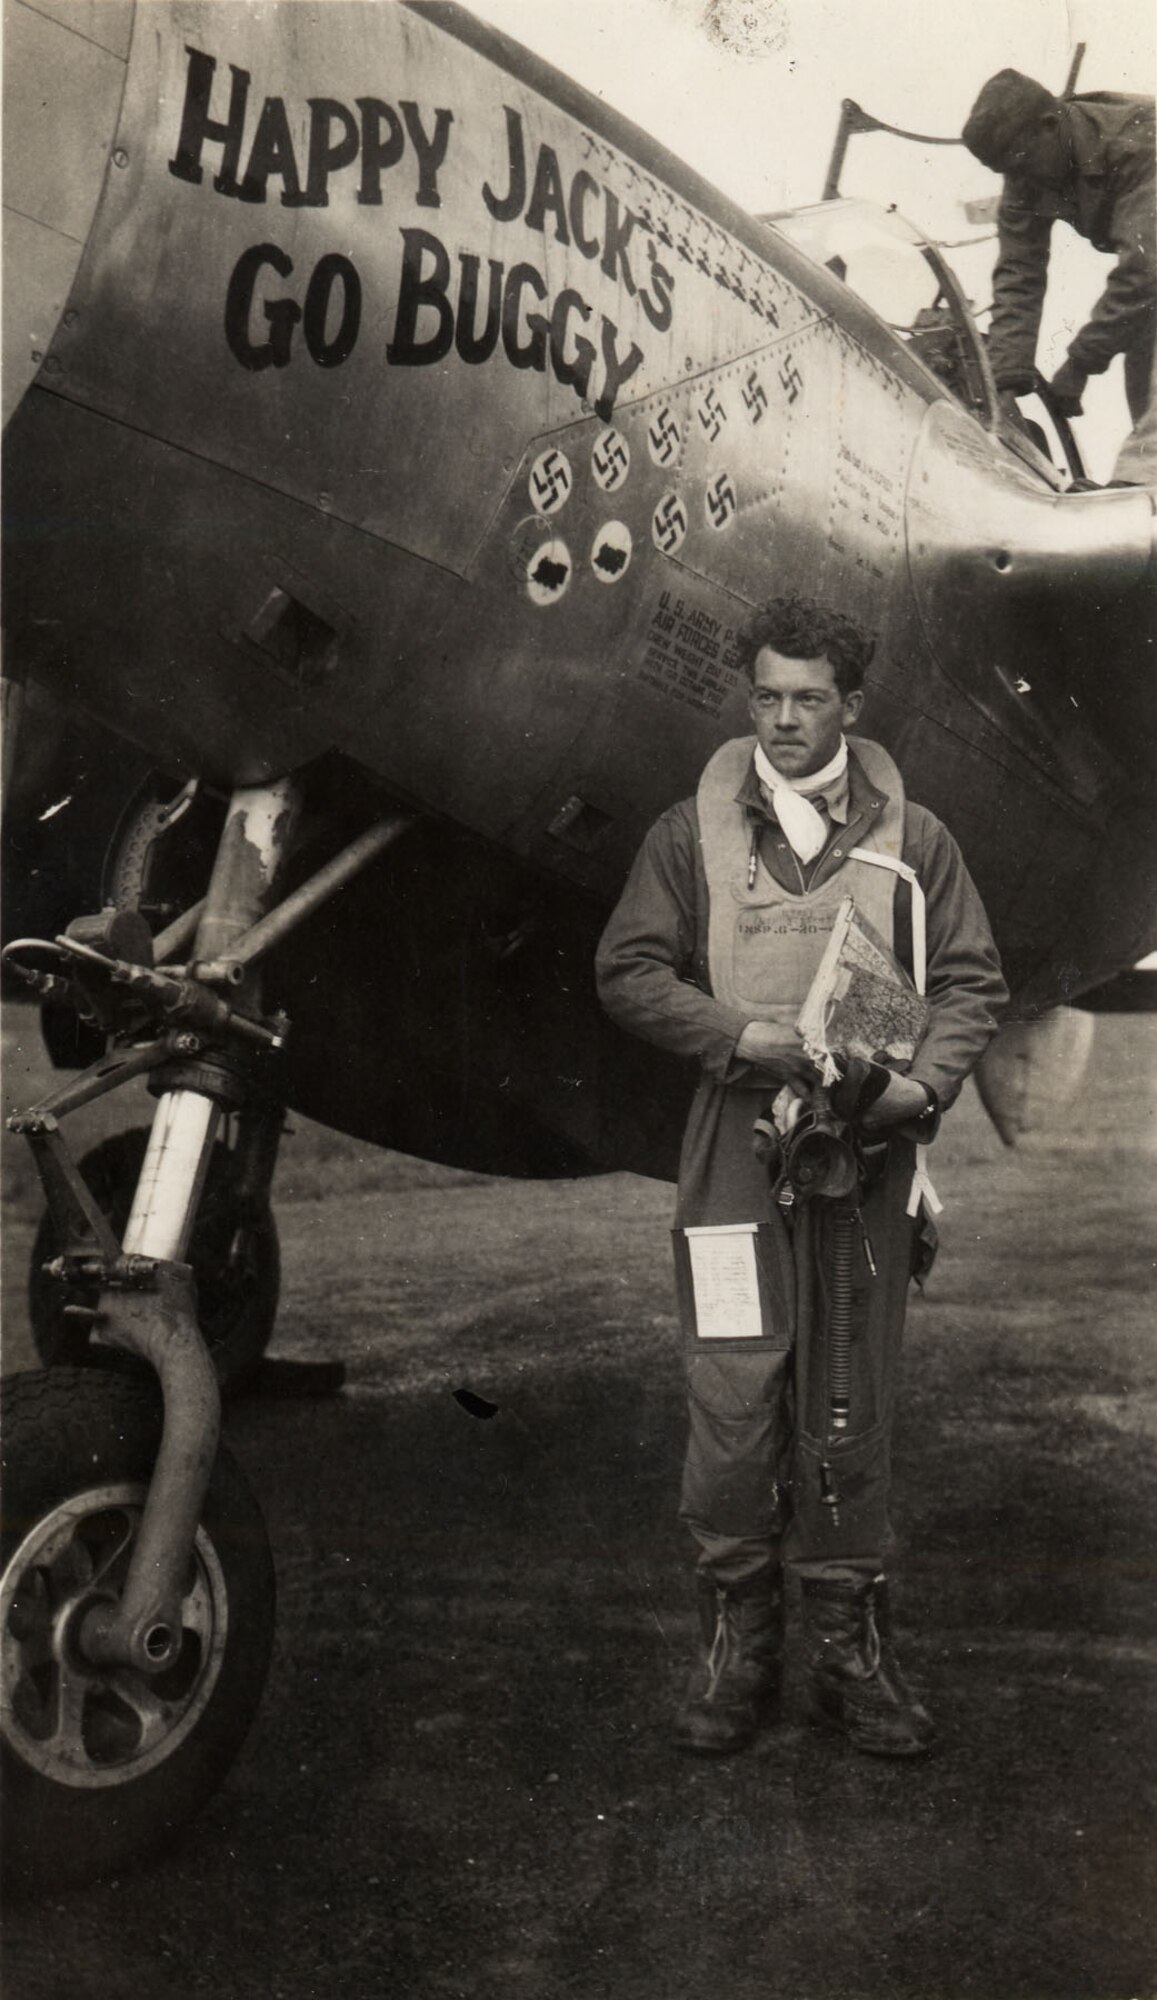 Ilfrey in front of his P-38 “Happy Jack’s Go-Buggy.” (U.S. Air Force photo)